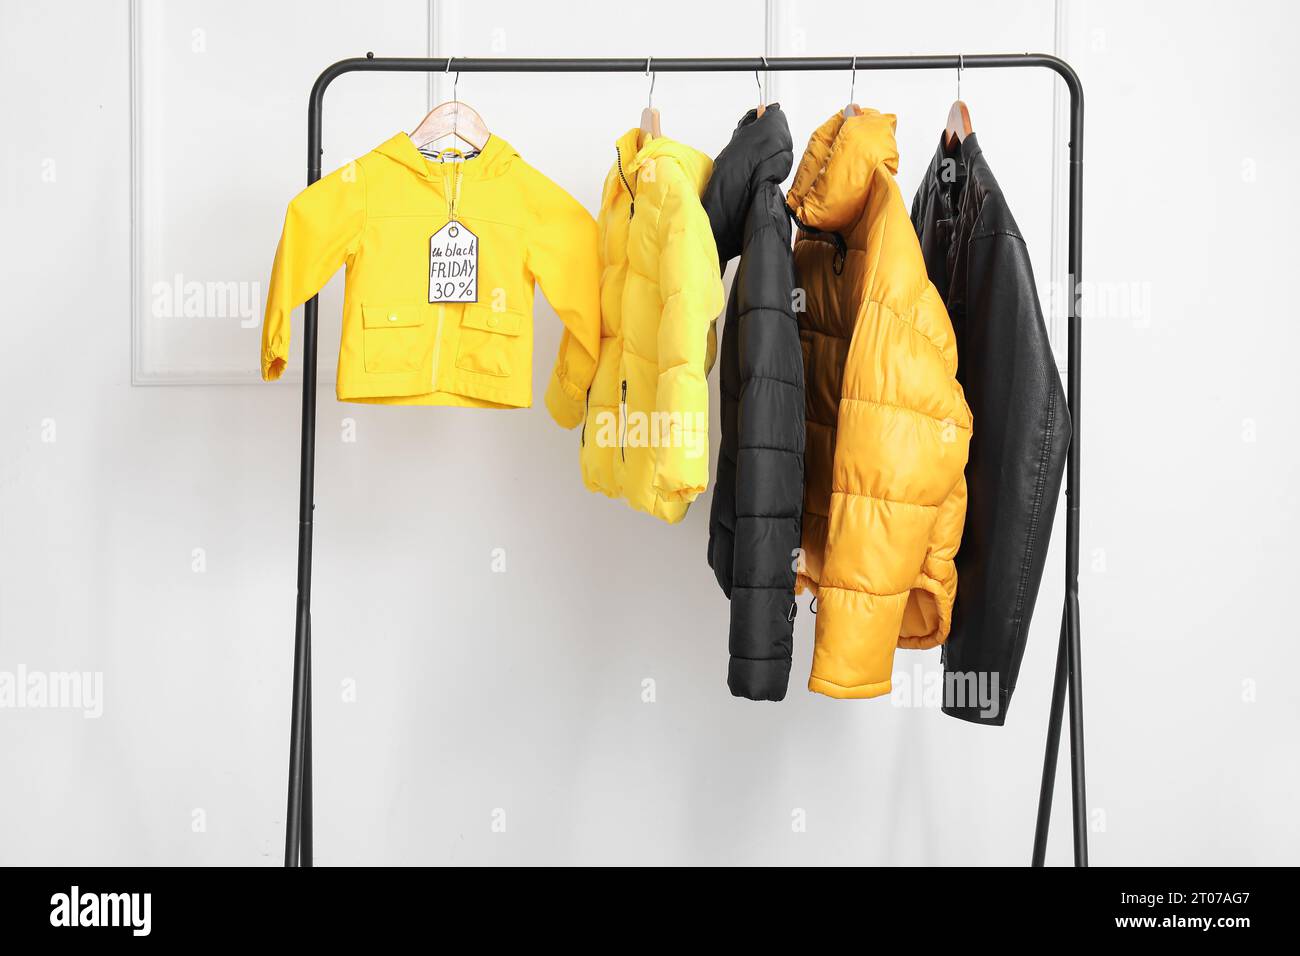 Rack with different jackets against light wall. Black Friday sale Stock Photo